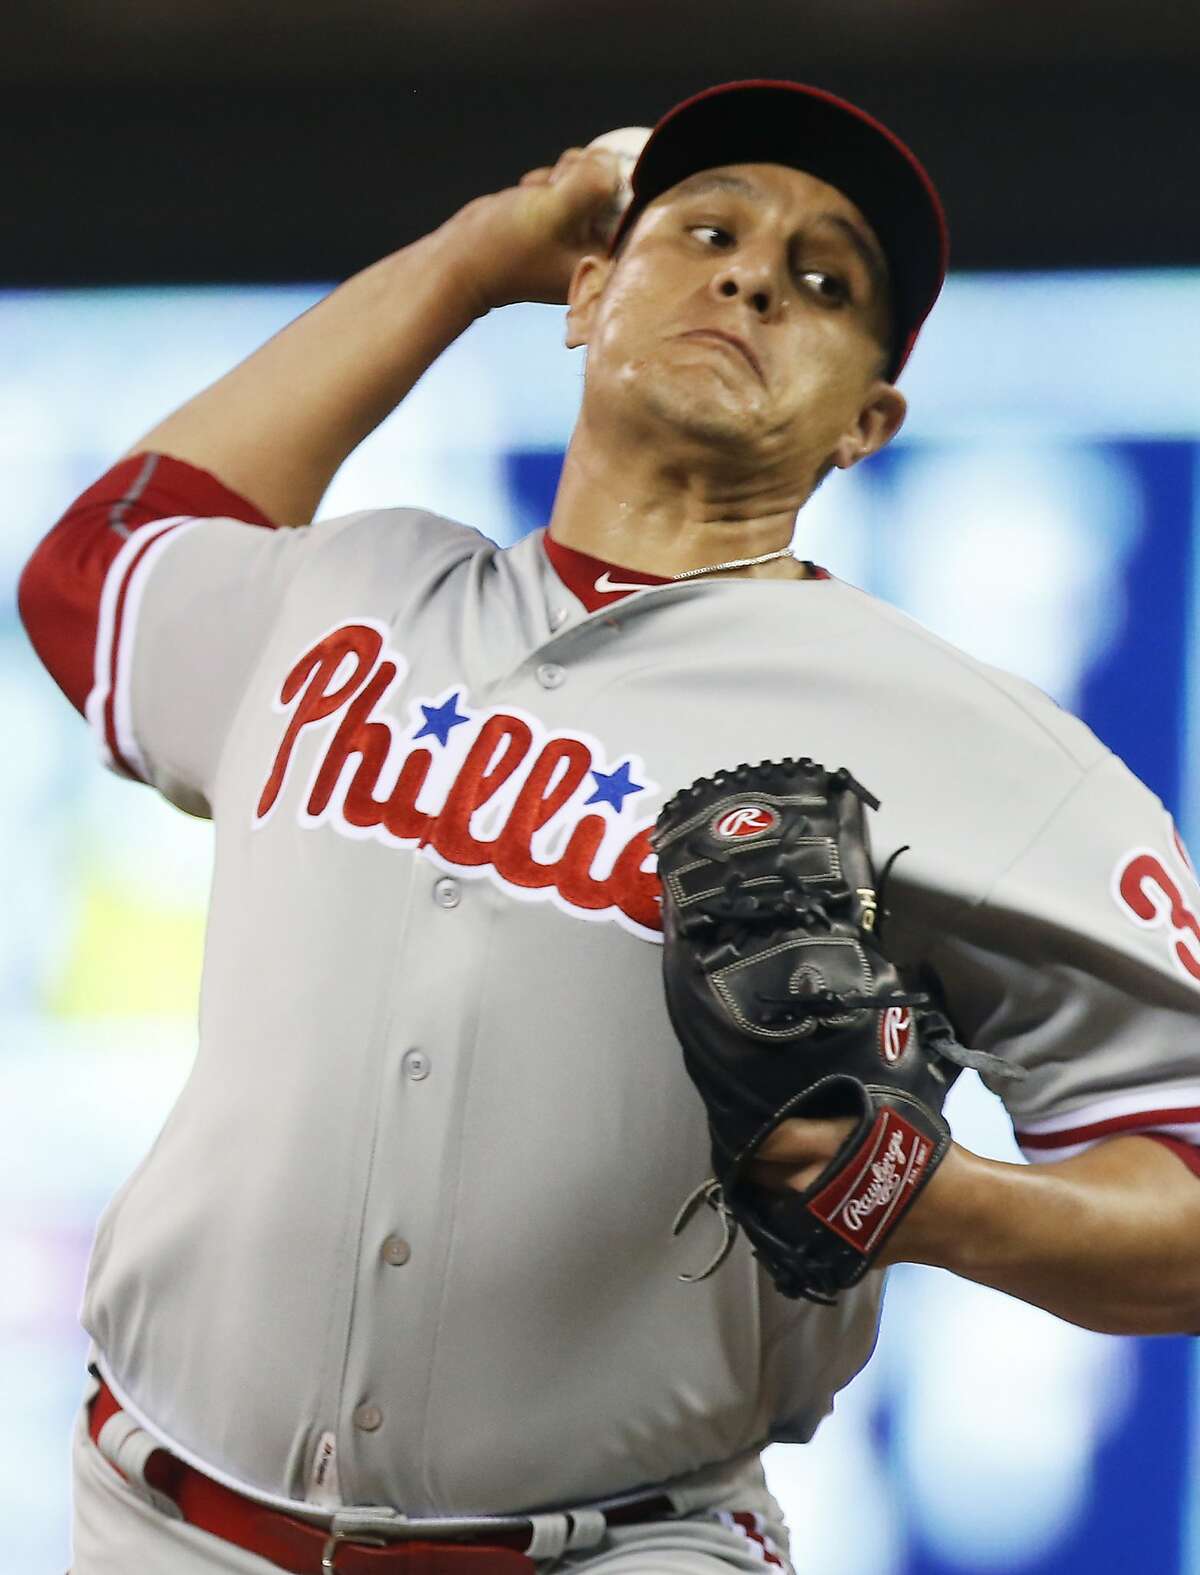 Philadelphia Phillies relief pitcher David Hernandez throws against the Minnesota Twins during the seventh inning of a baseball game Wednesday, June 22, 2016, in Minneapolis. The Twins won 6-5. Hernandez took the loss. (AP Photo/Jim Mone)